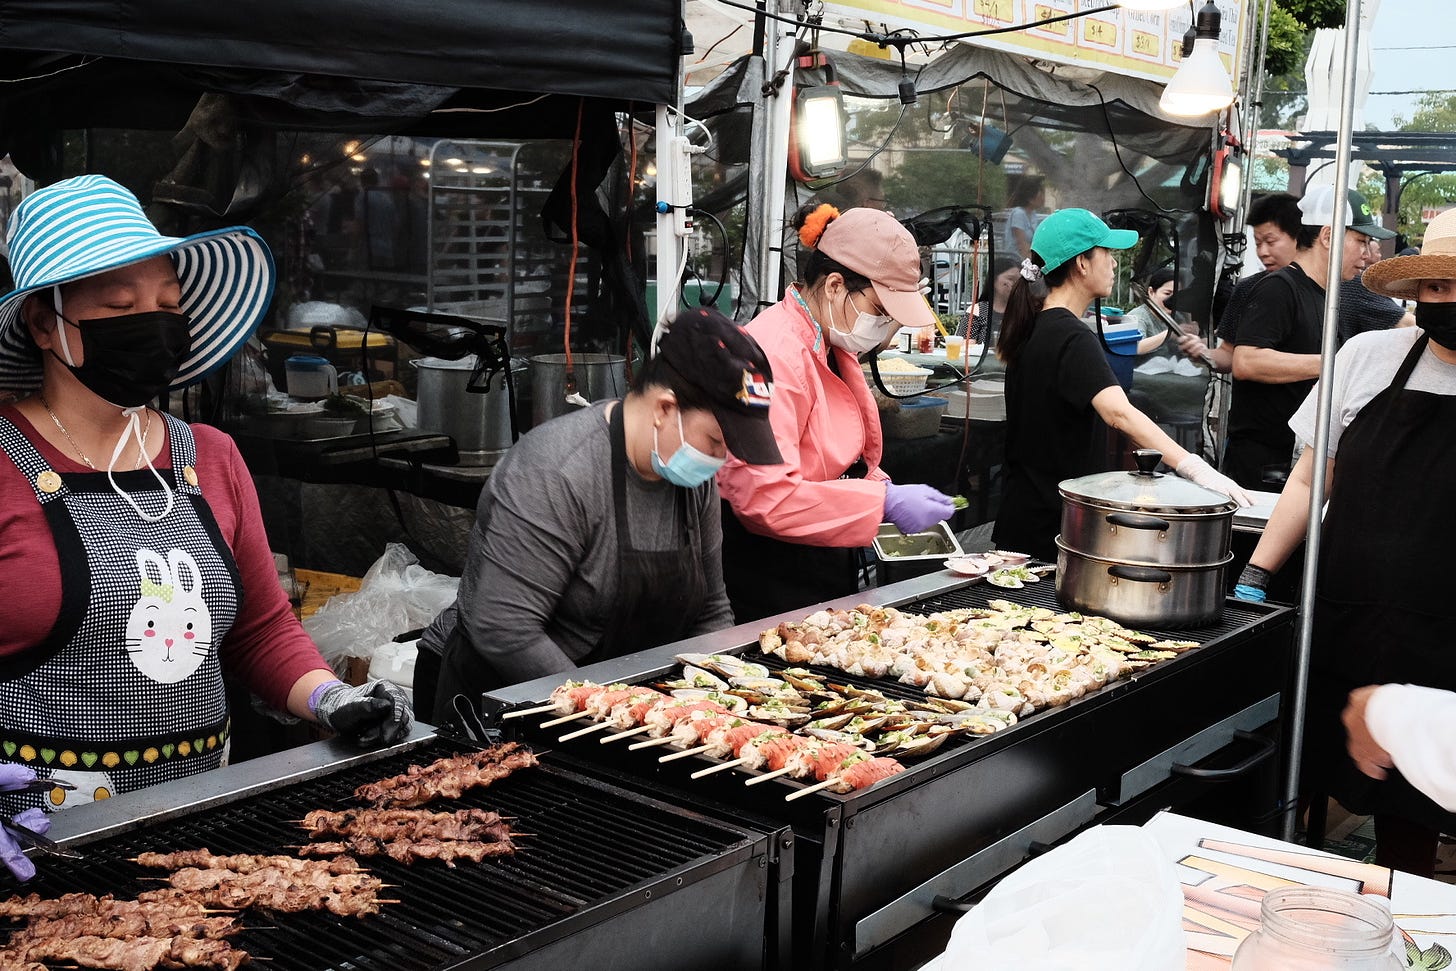 Women cooking at a grill during the Little Saigon Night Market